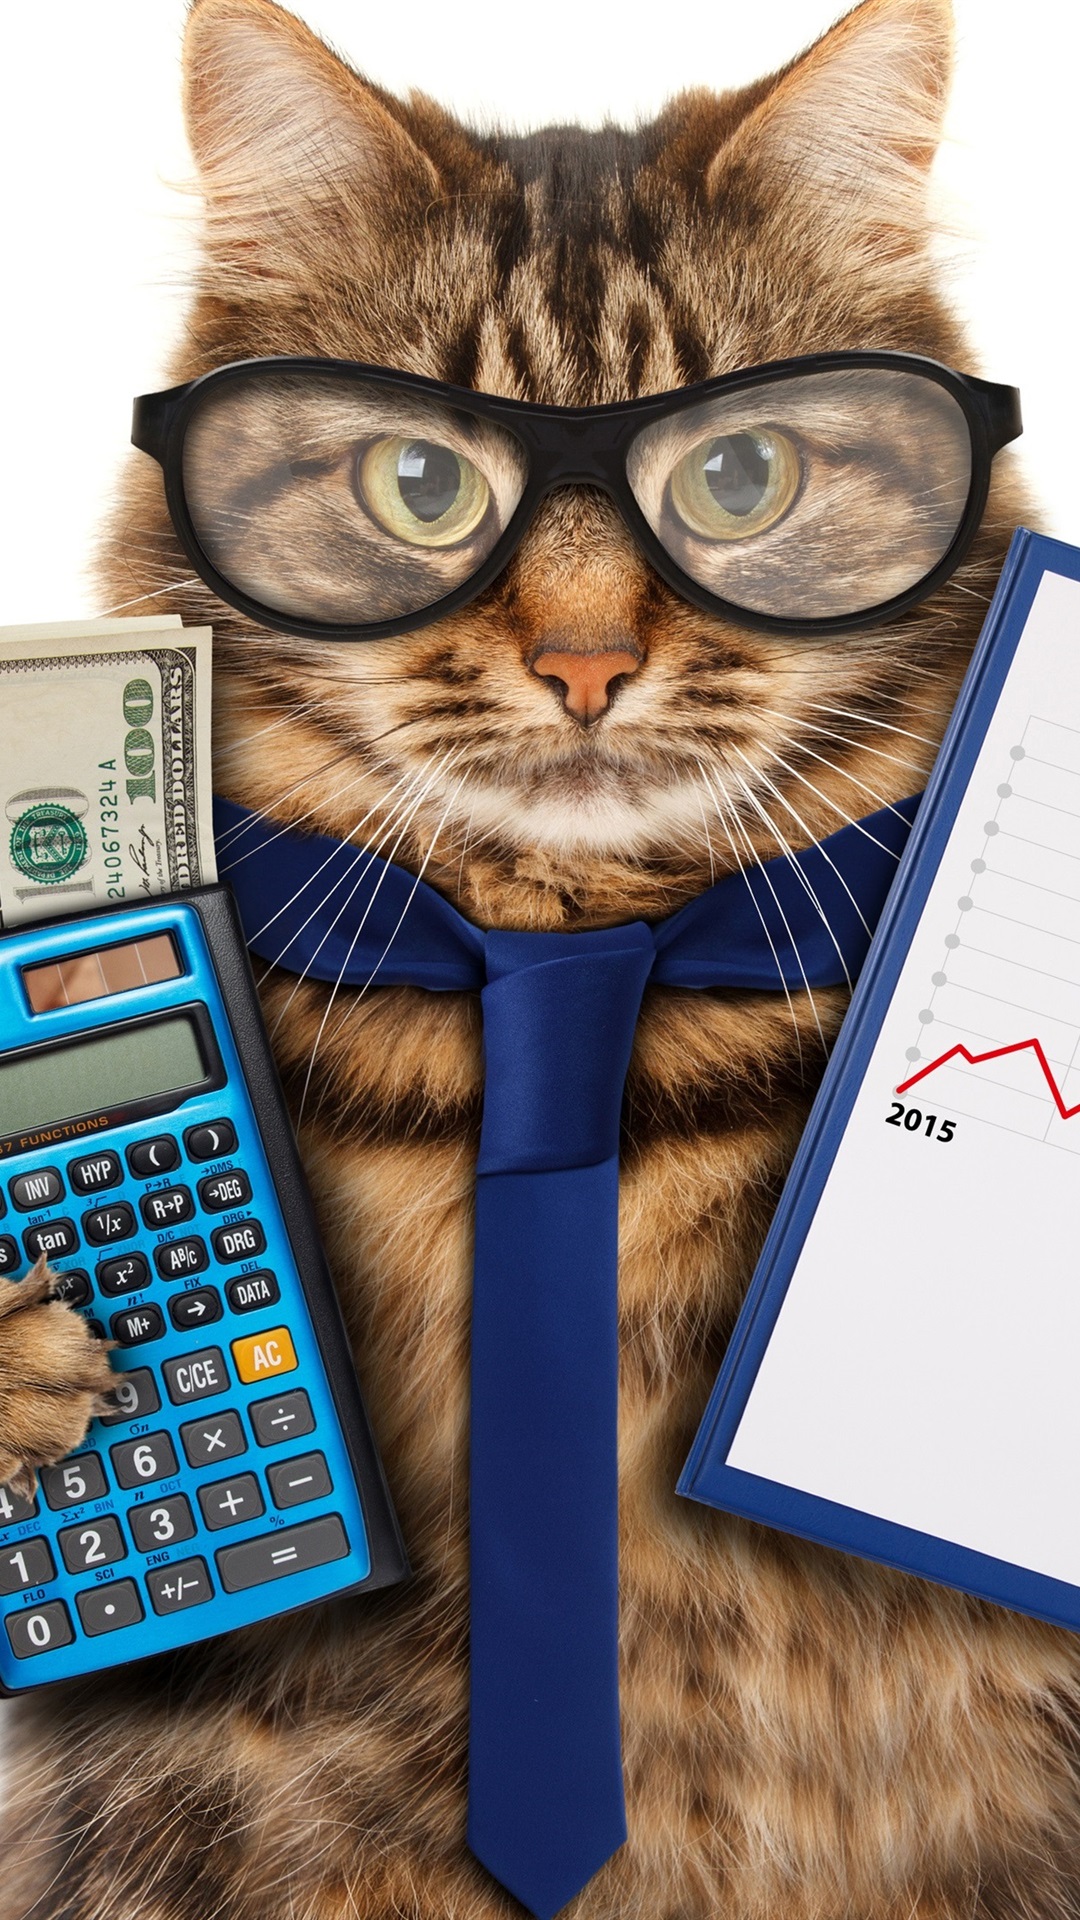 Funny Animals, Cat, Glasses, Tie, Calculator, Money, Accountant 1080x1920 IPhone 8 7 6 6S Plus Wallpaper, Background, Picture, Image